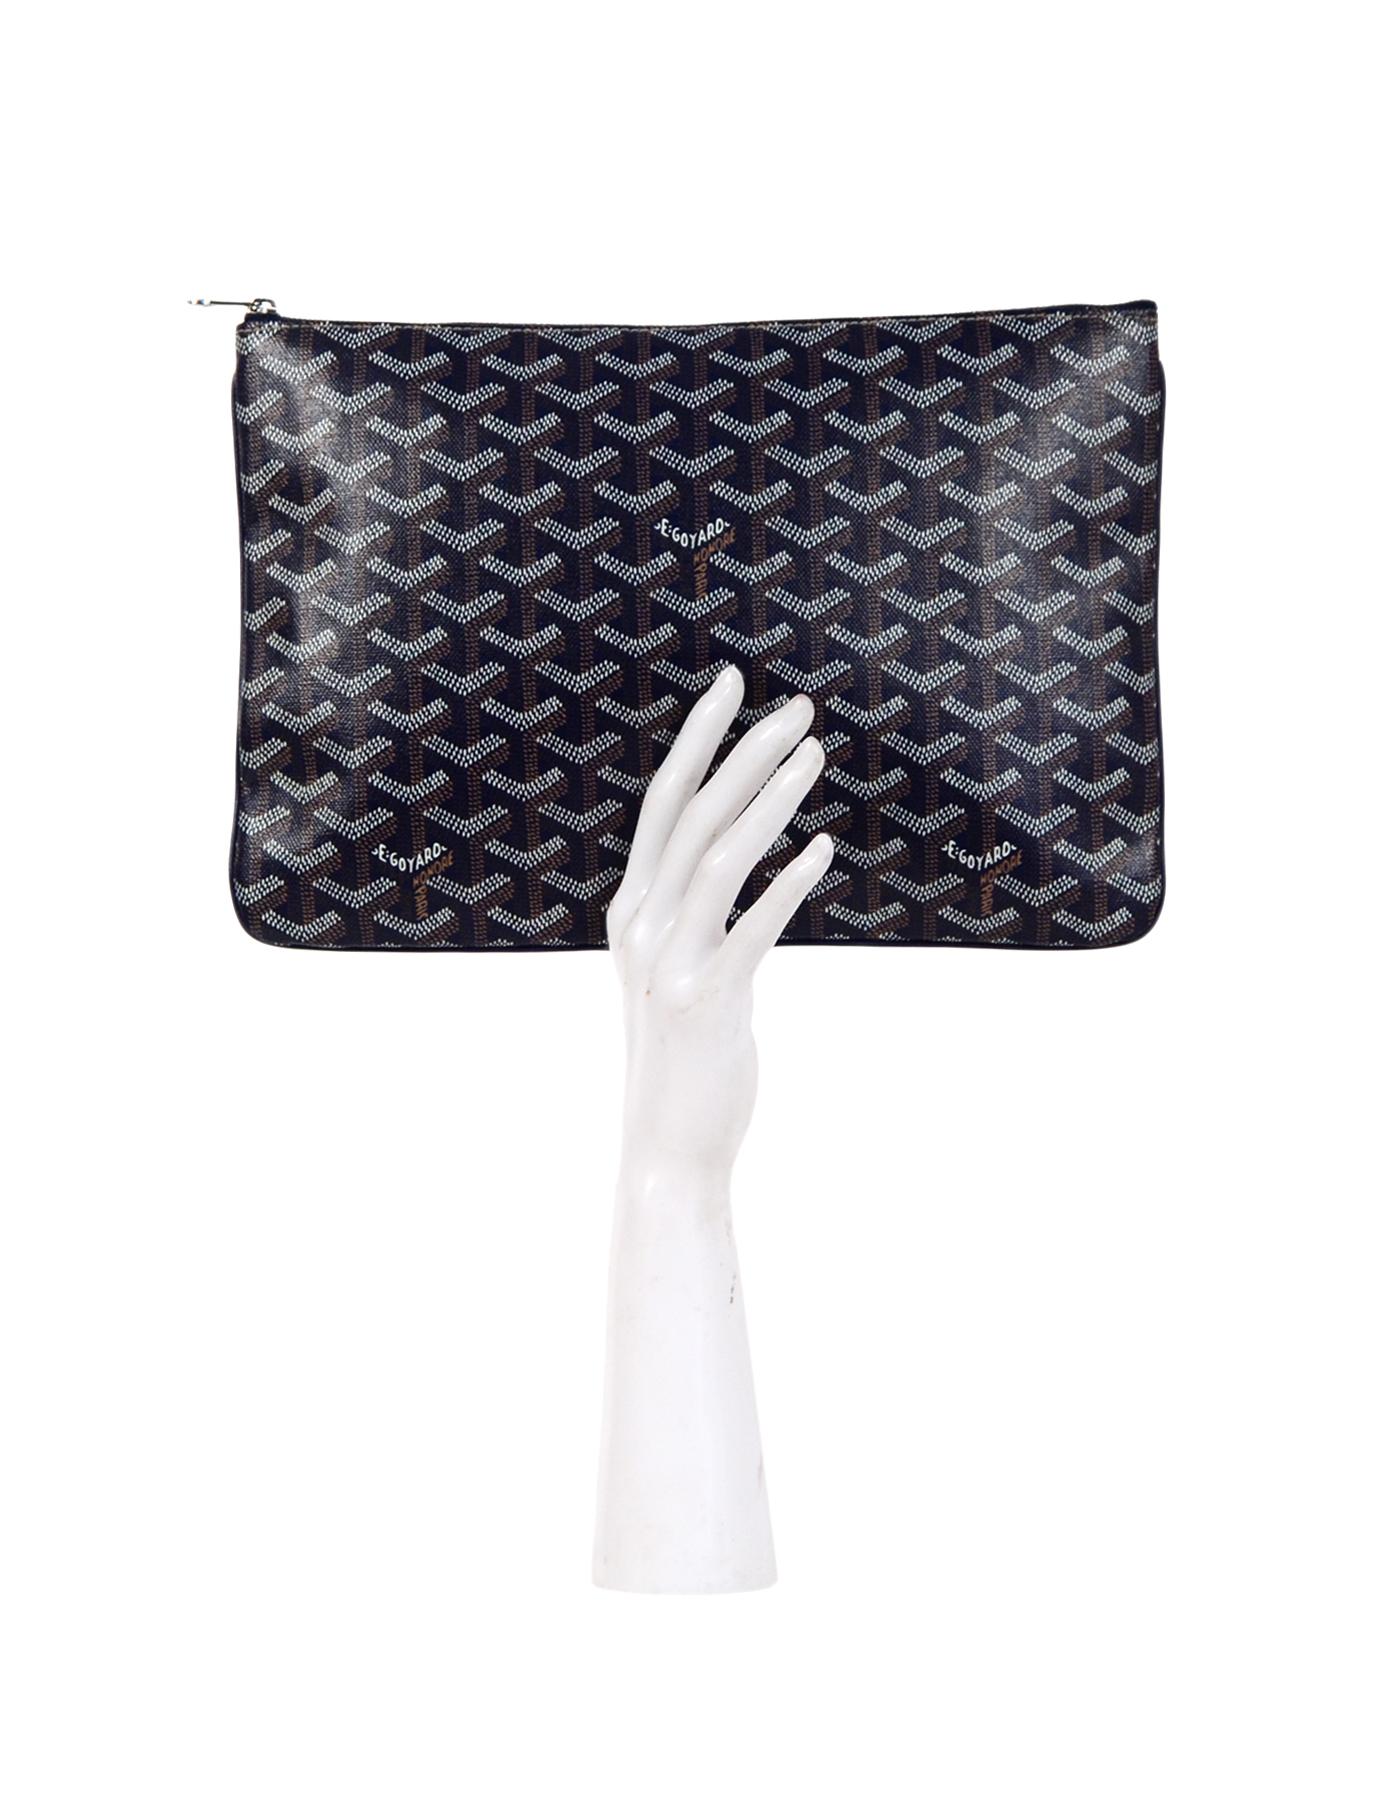 Goyard Navy Blue Goyardine Senat MM Zip Top Clutch

Made In: France
Color: Navy blue, tan, white
Hardware: Silver
Materials: Coated canvas, metal
Lining: Yellow canvas
Closure/Opening: Zip top
Exterior Pockets: None
Interior Pockets: One wall